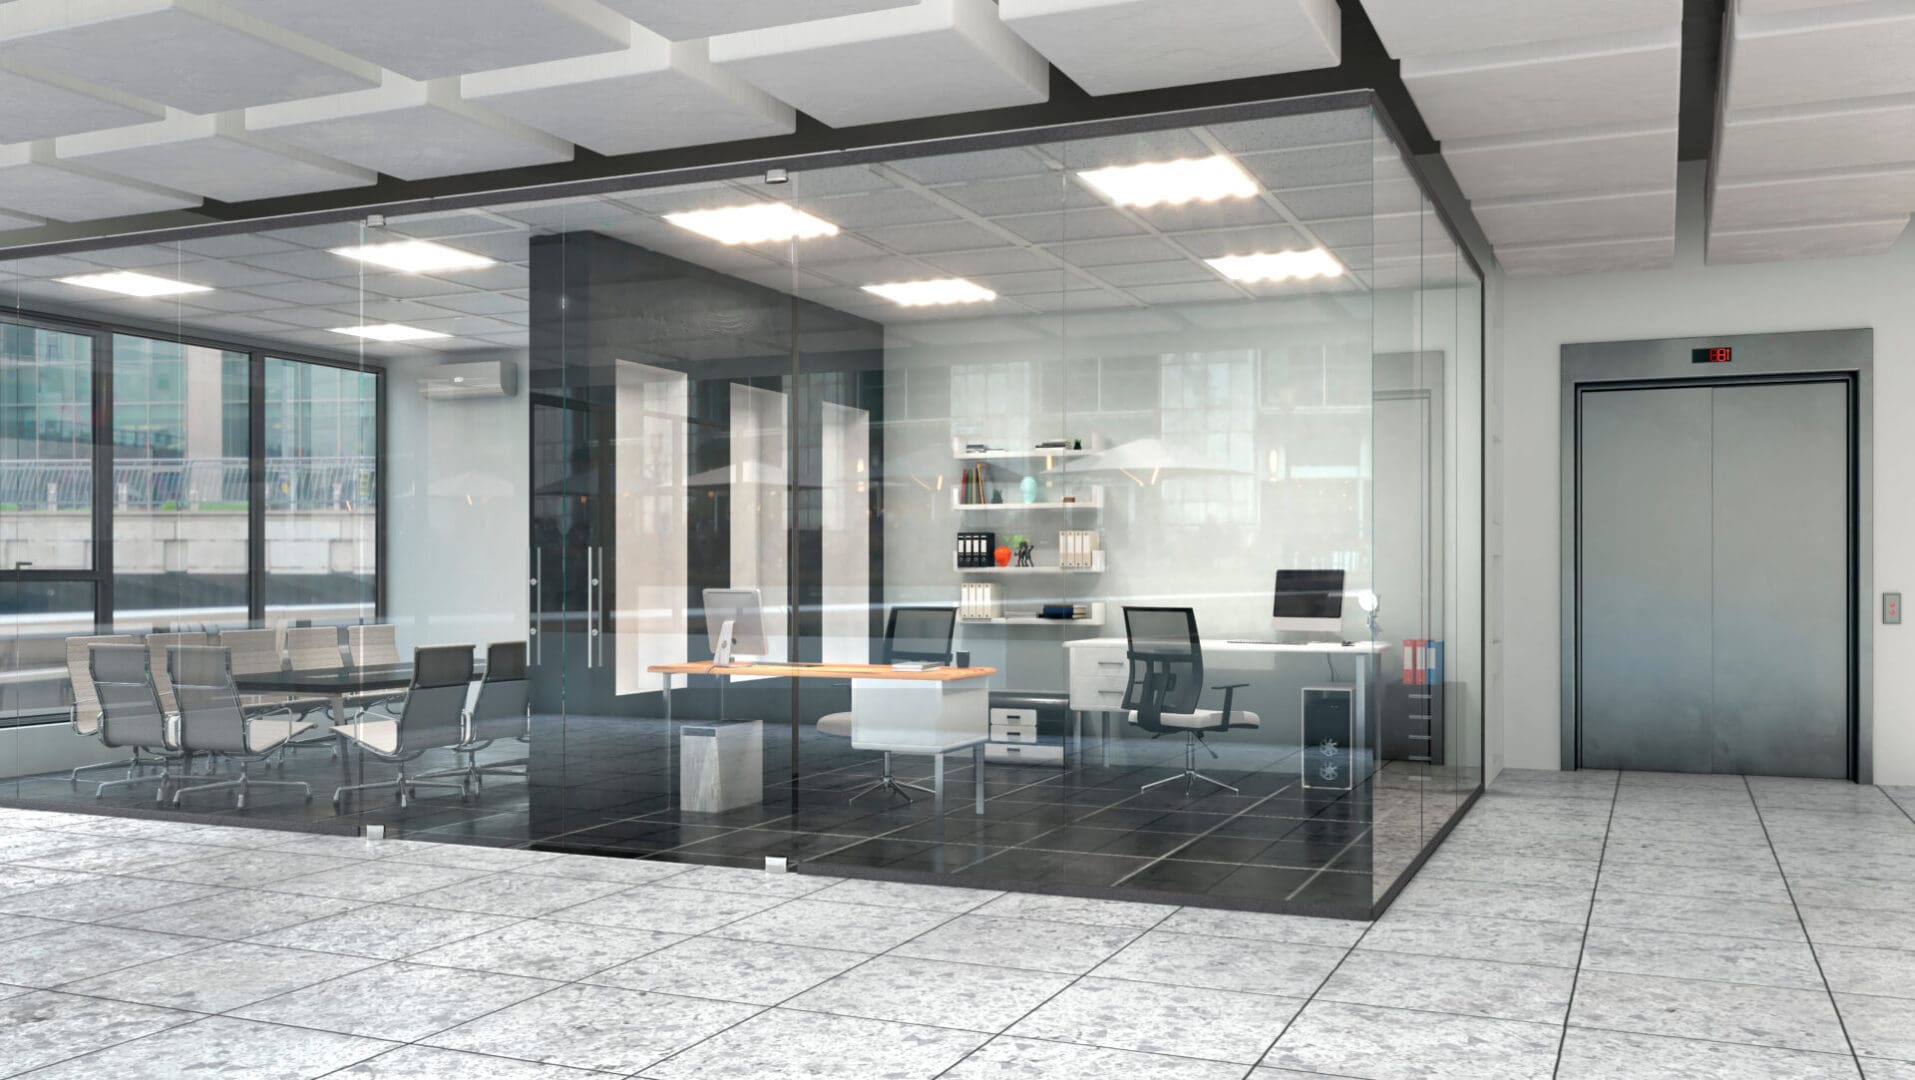 A glass walled conference room with black chairs.